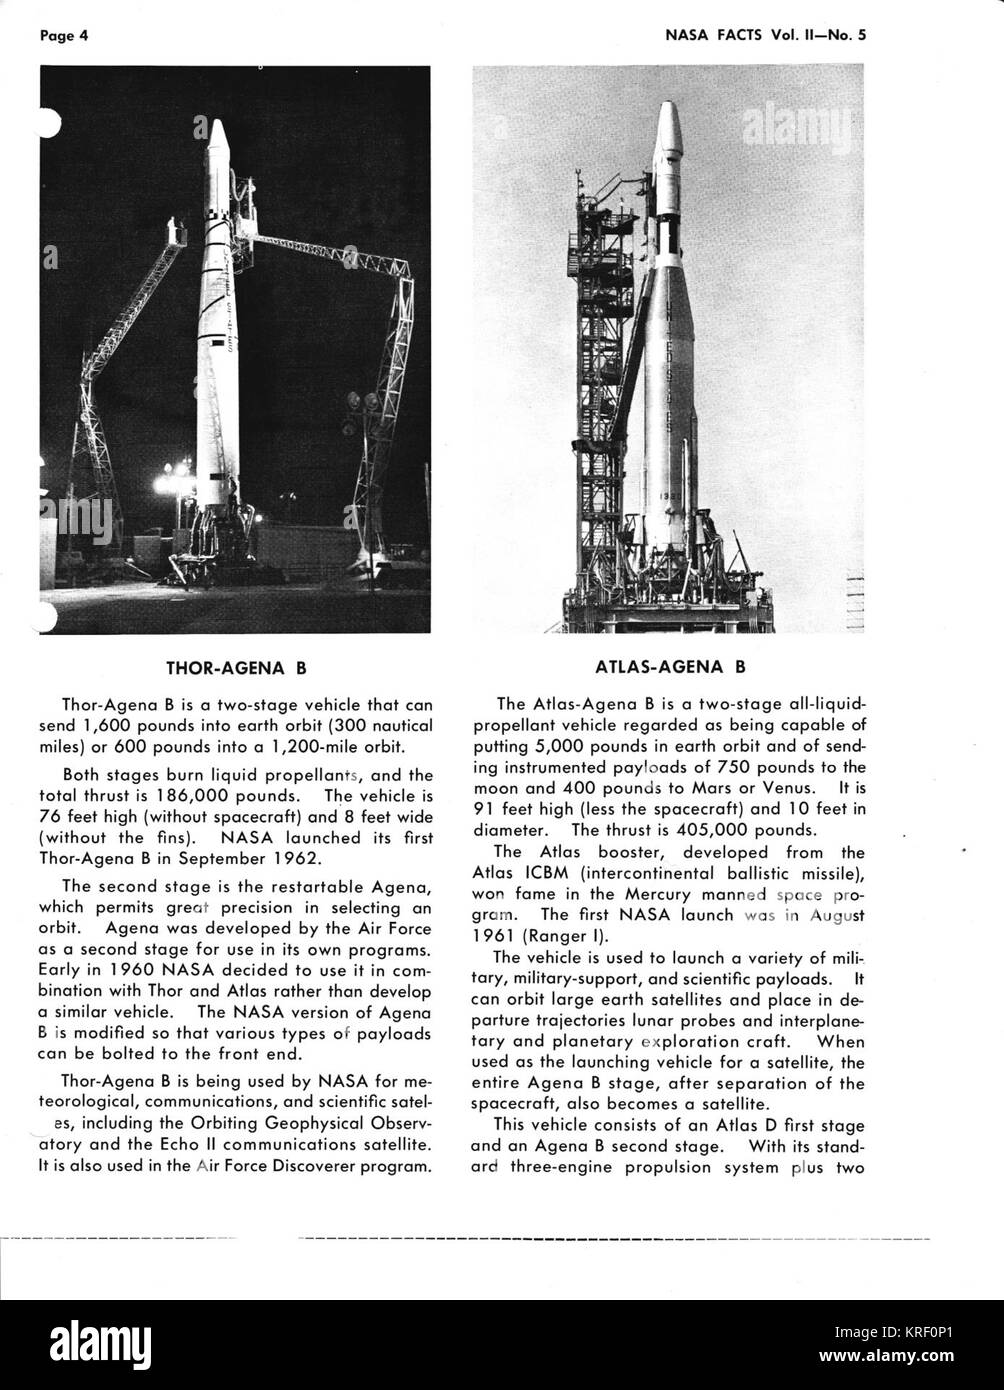 NASA FACTS Volume II Number 5 LAUNCH VEHICLES page 04 Stock Photo